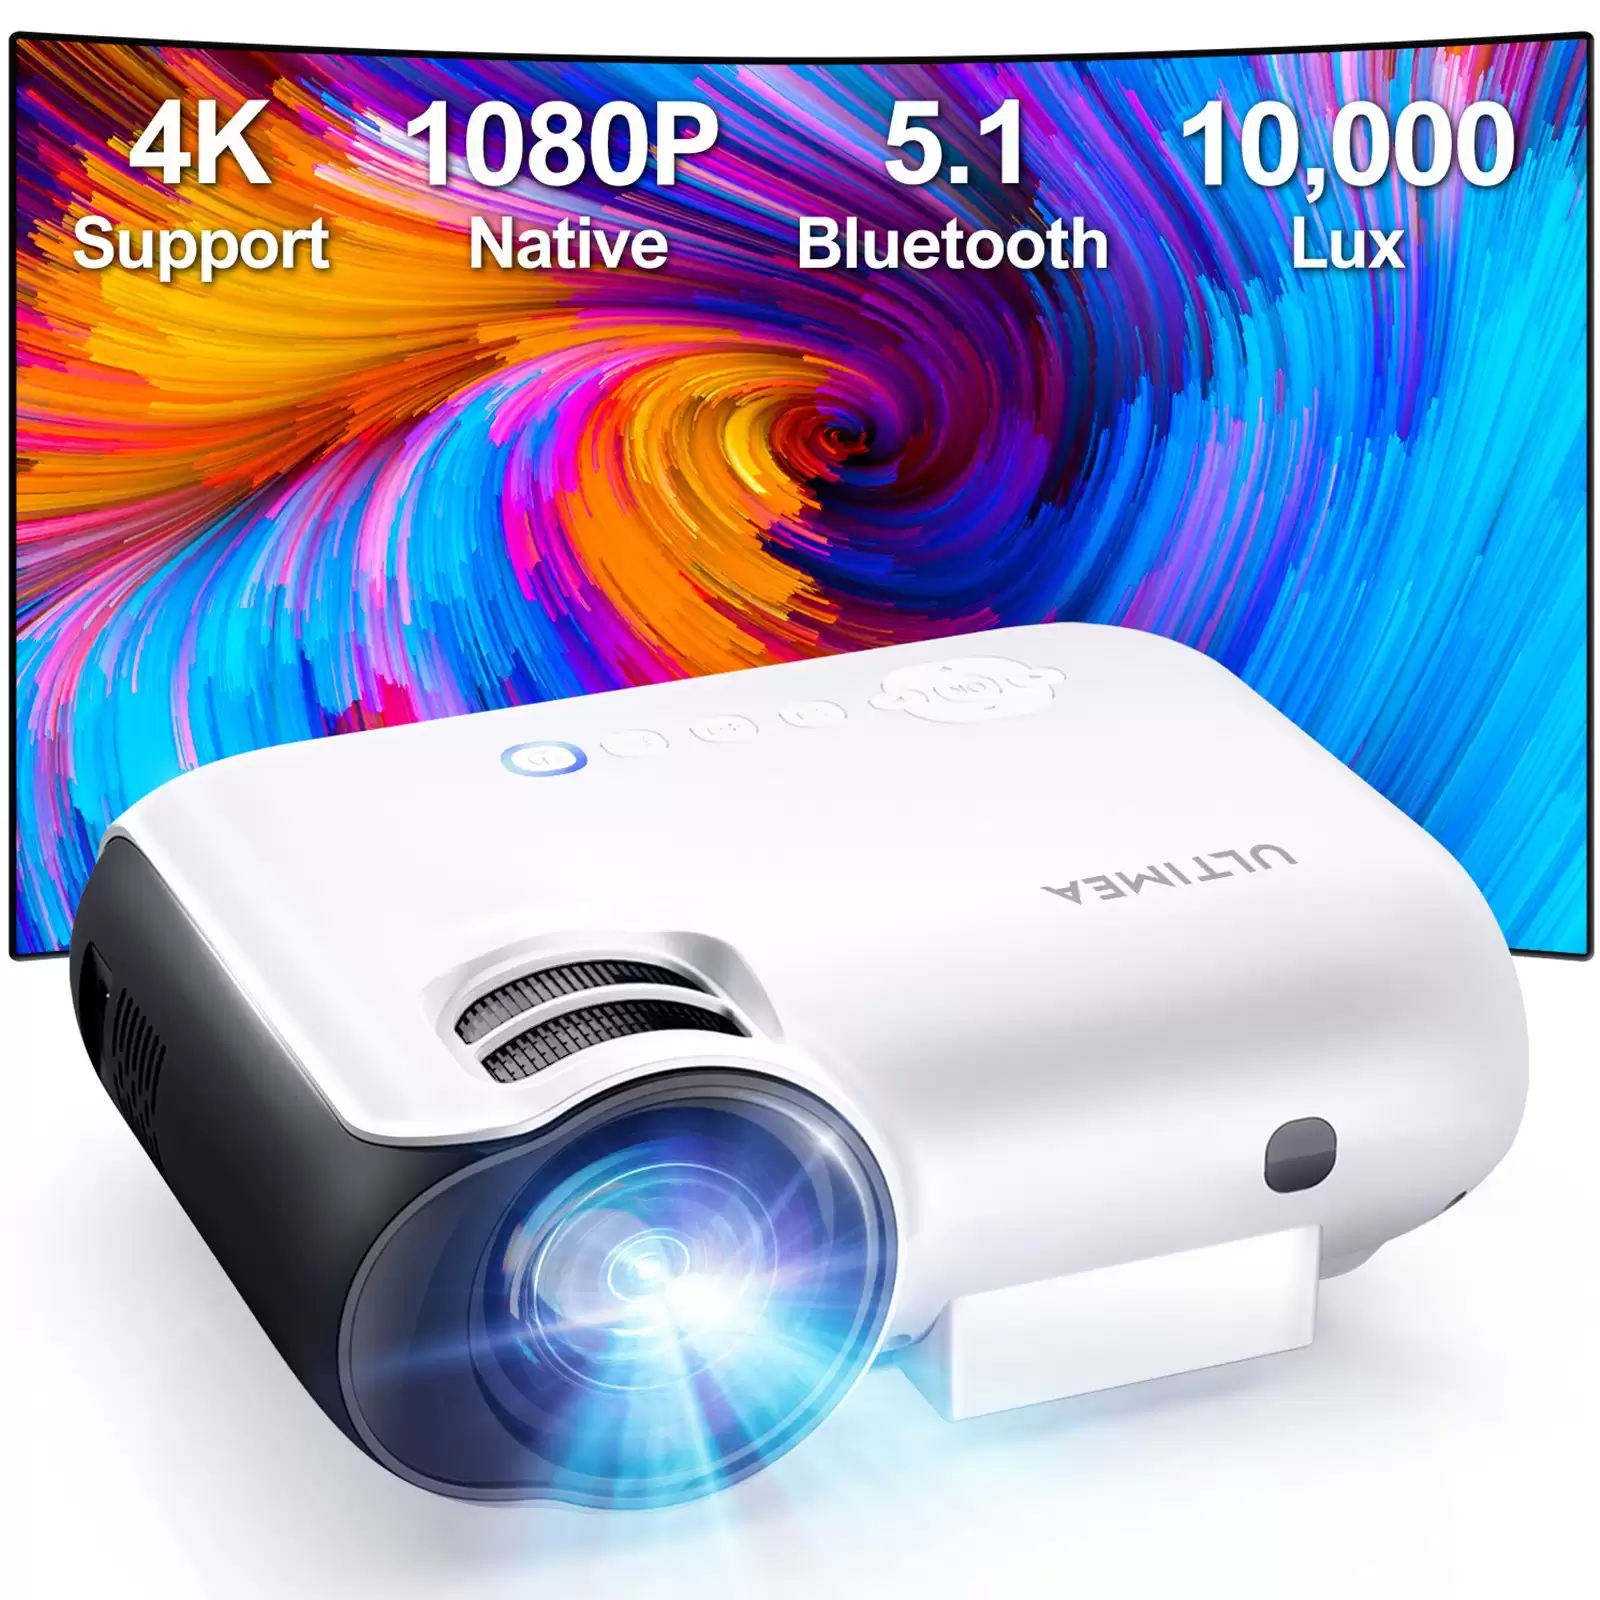 Order In Just €99.99 Ultimea Apollo P20 Projector With This Discount Coupon At Cafago